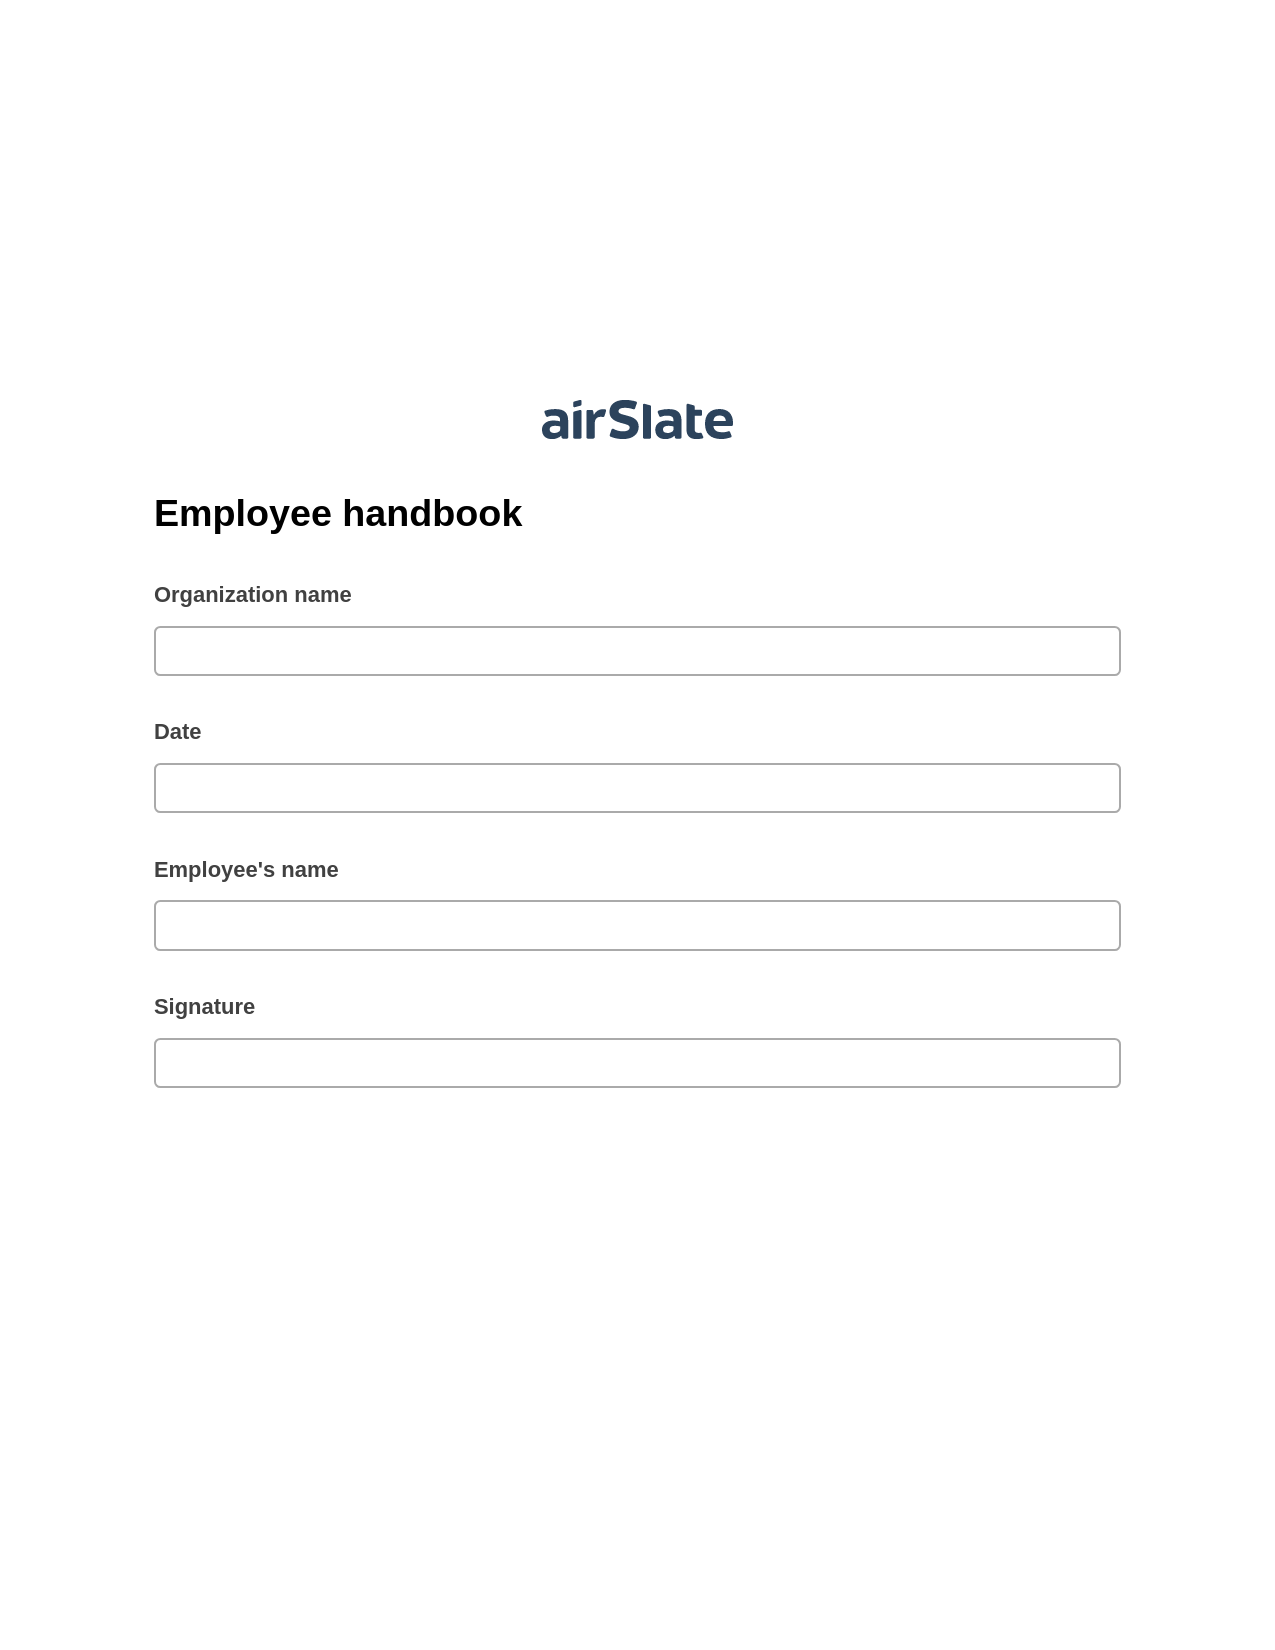 Employee handbook Pre-fill from Salesforce Records with SOQL Bot, Email Notification Bot, Slack Two-Way Binding Bot